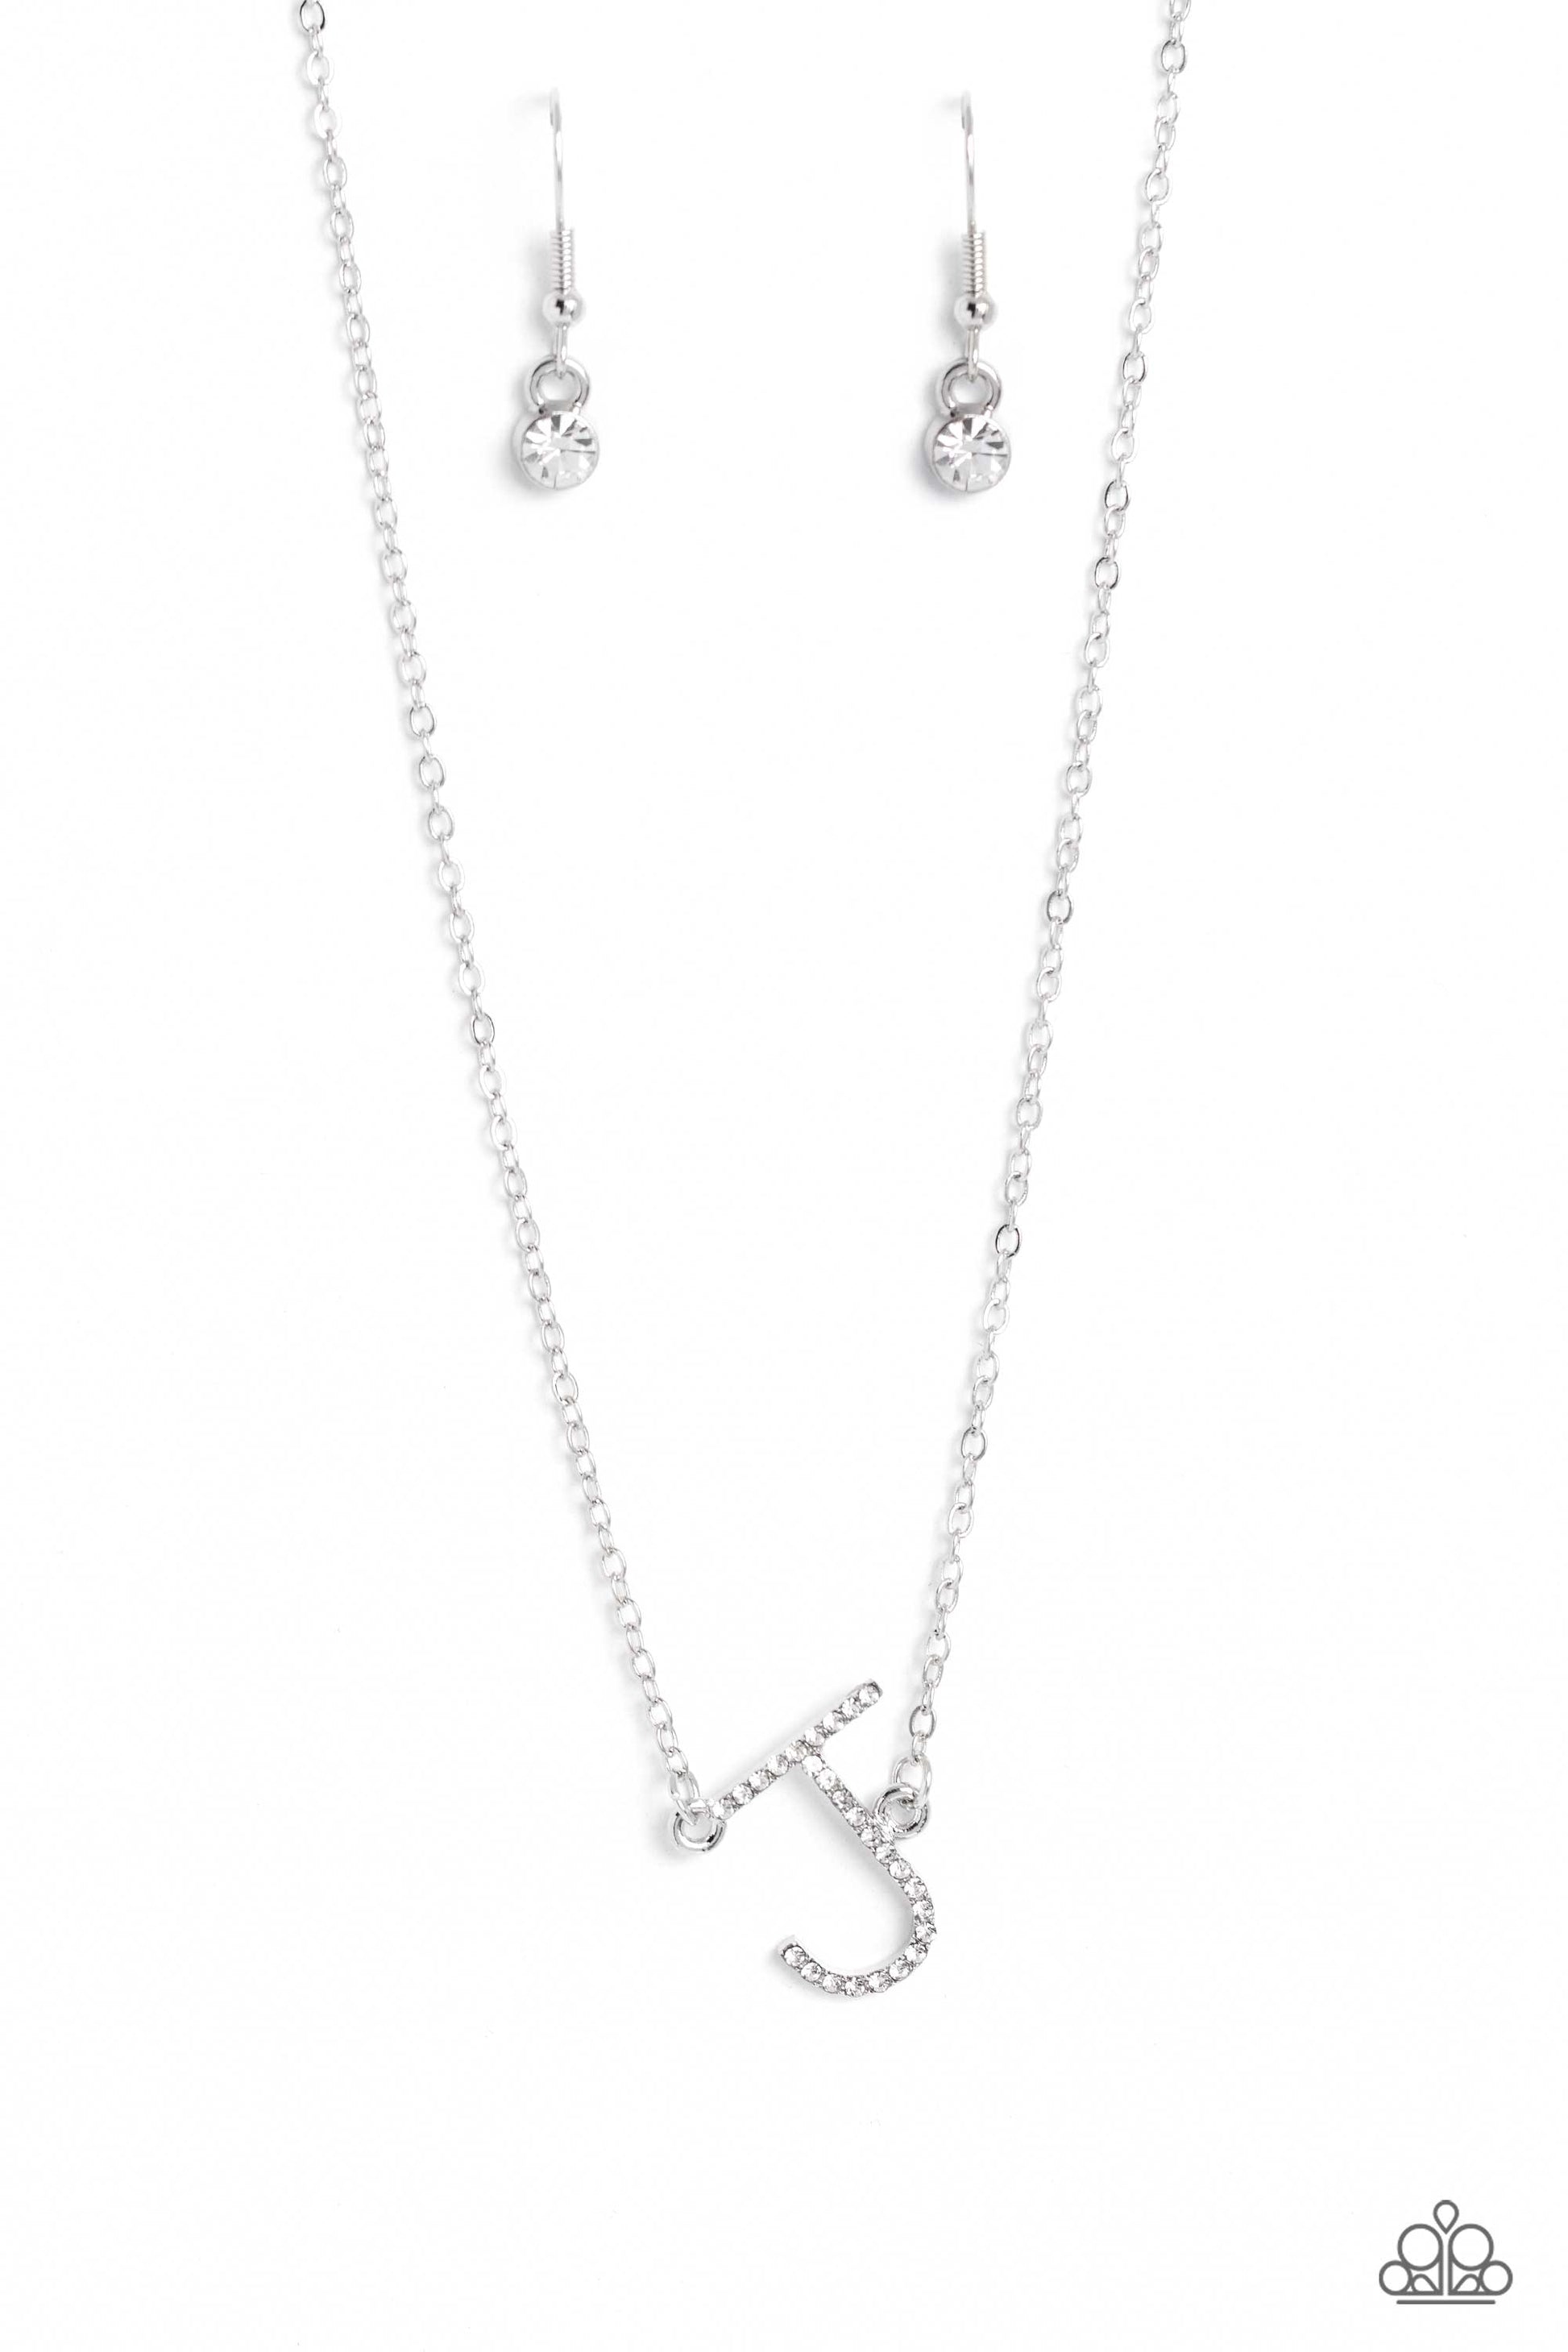 INITIALLY Yours White "J" Necklace - Paparazzi Accessories